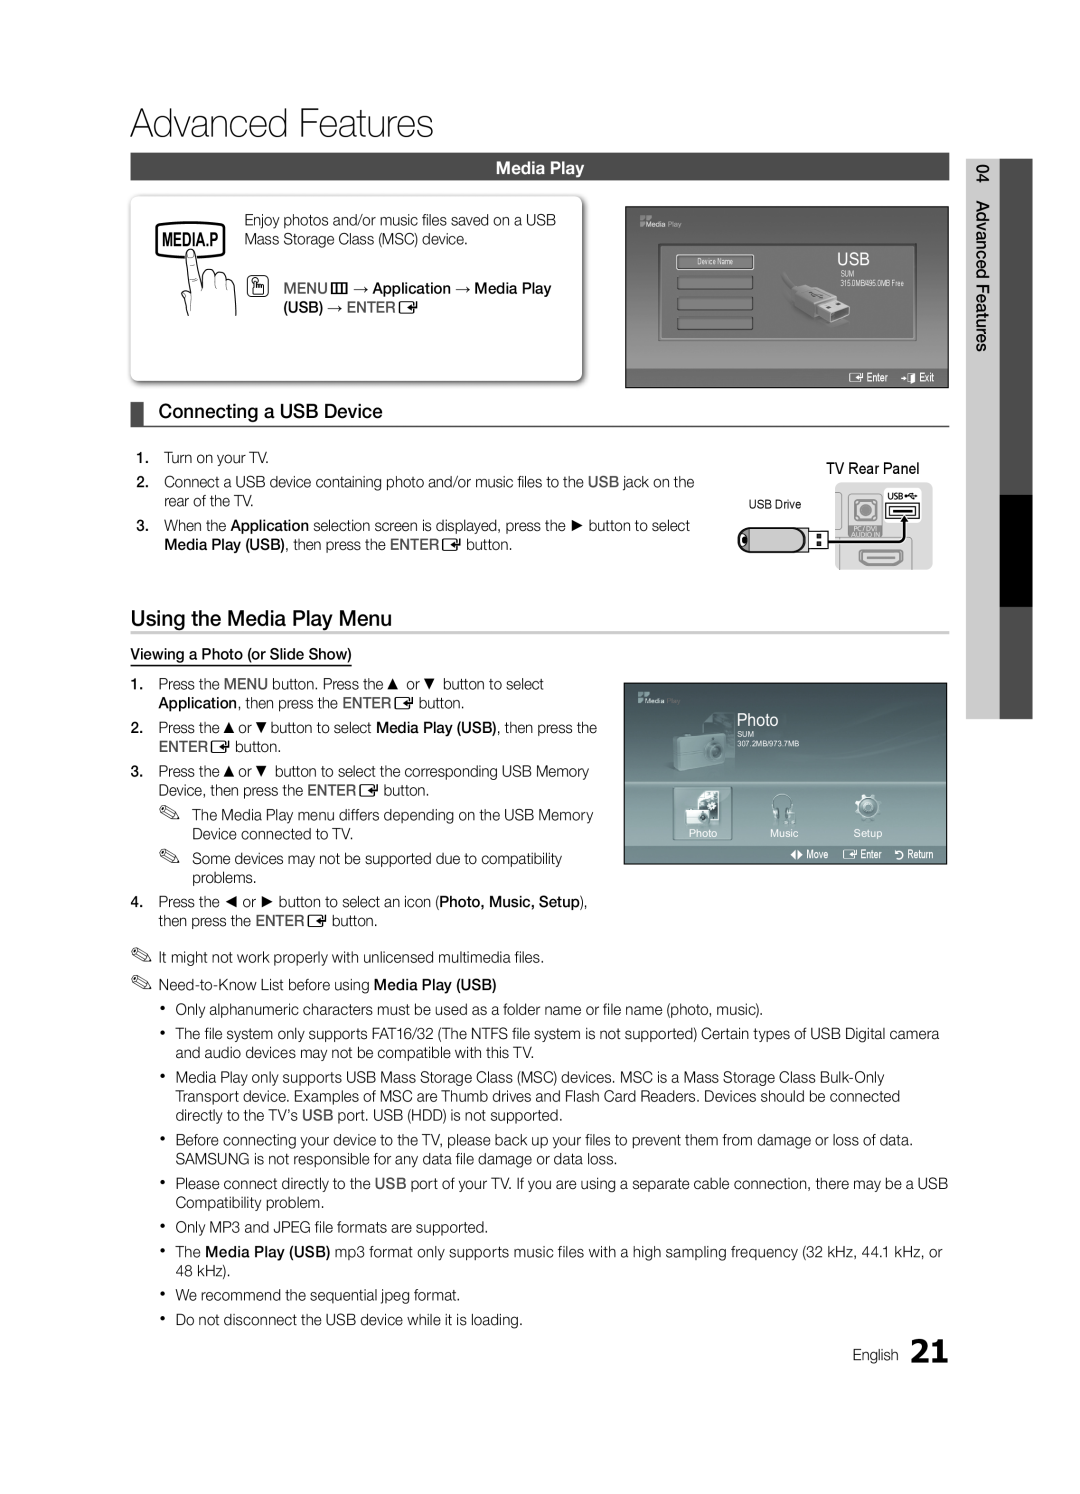 Samsung BN68-02620B-06 user manual Advanced Features, Using the Media Play Menu, Connecting a USB Device, Photo 